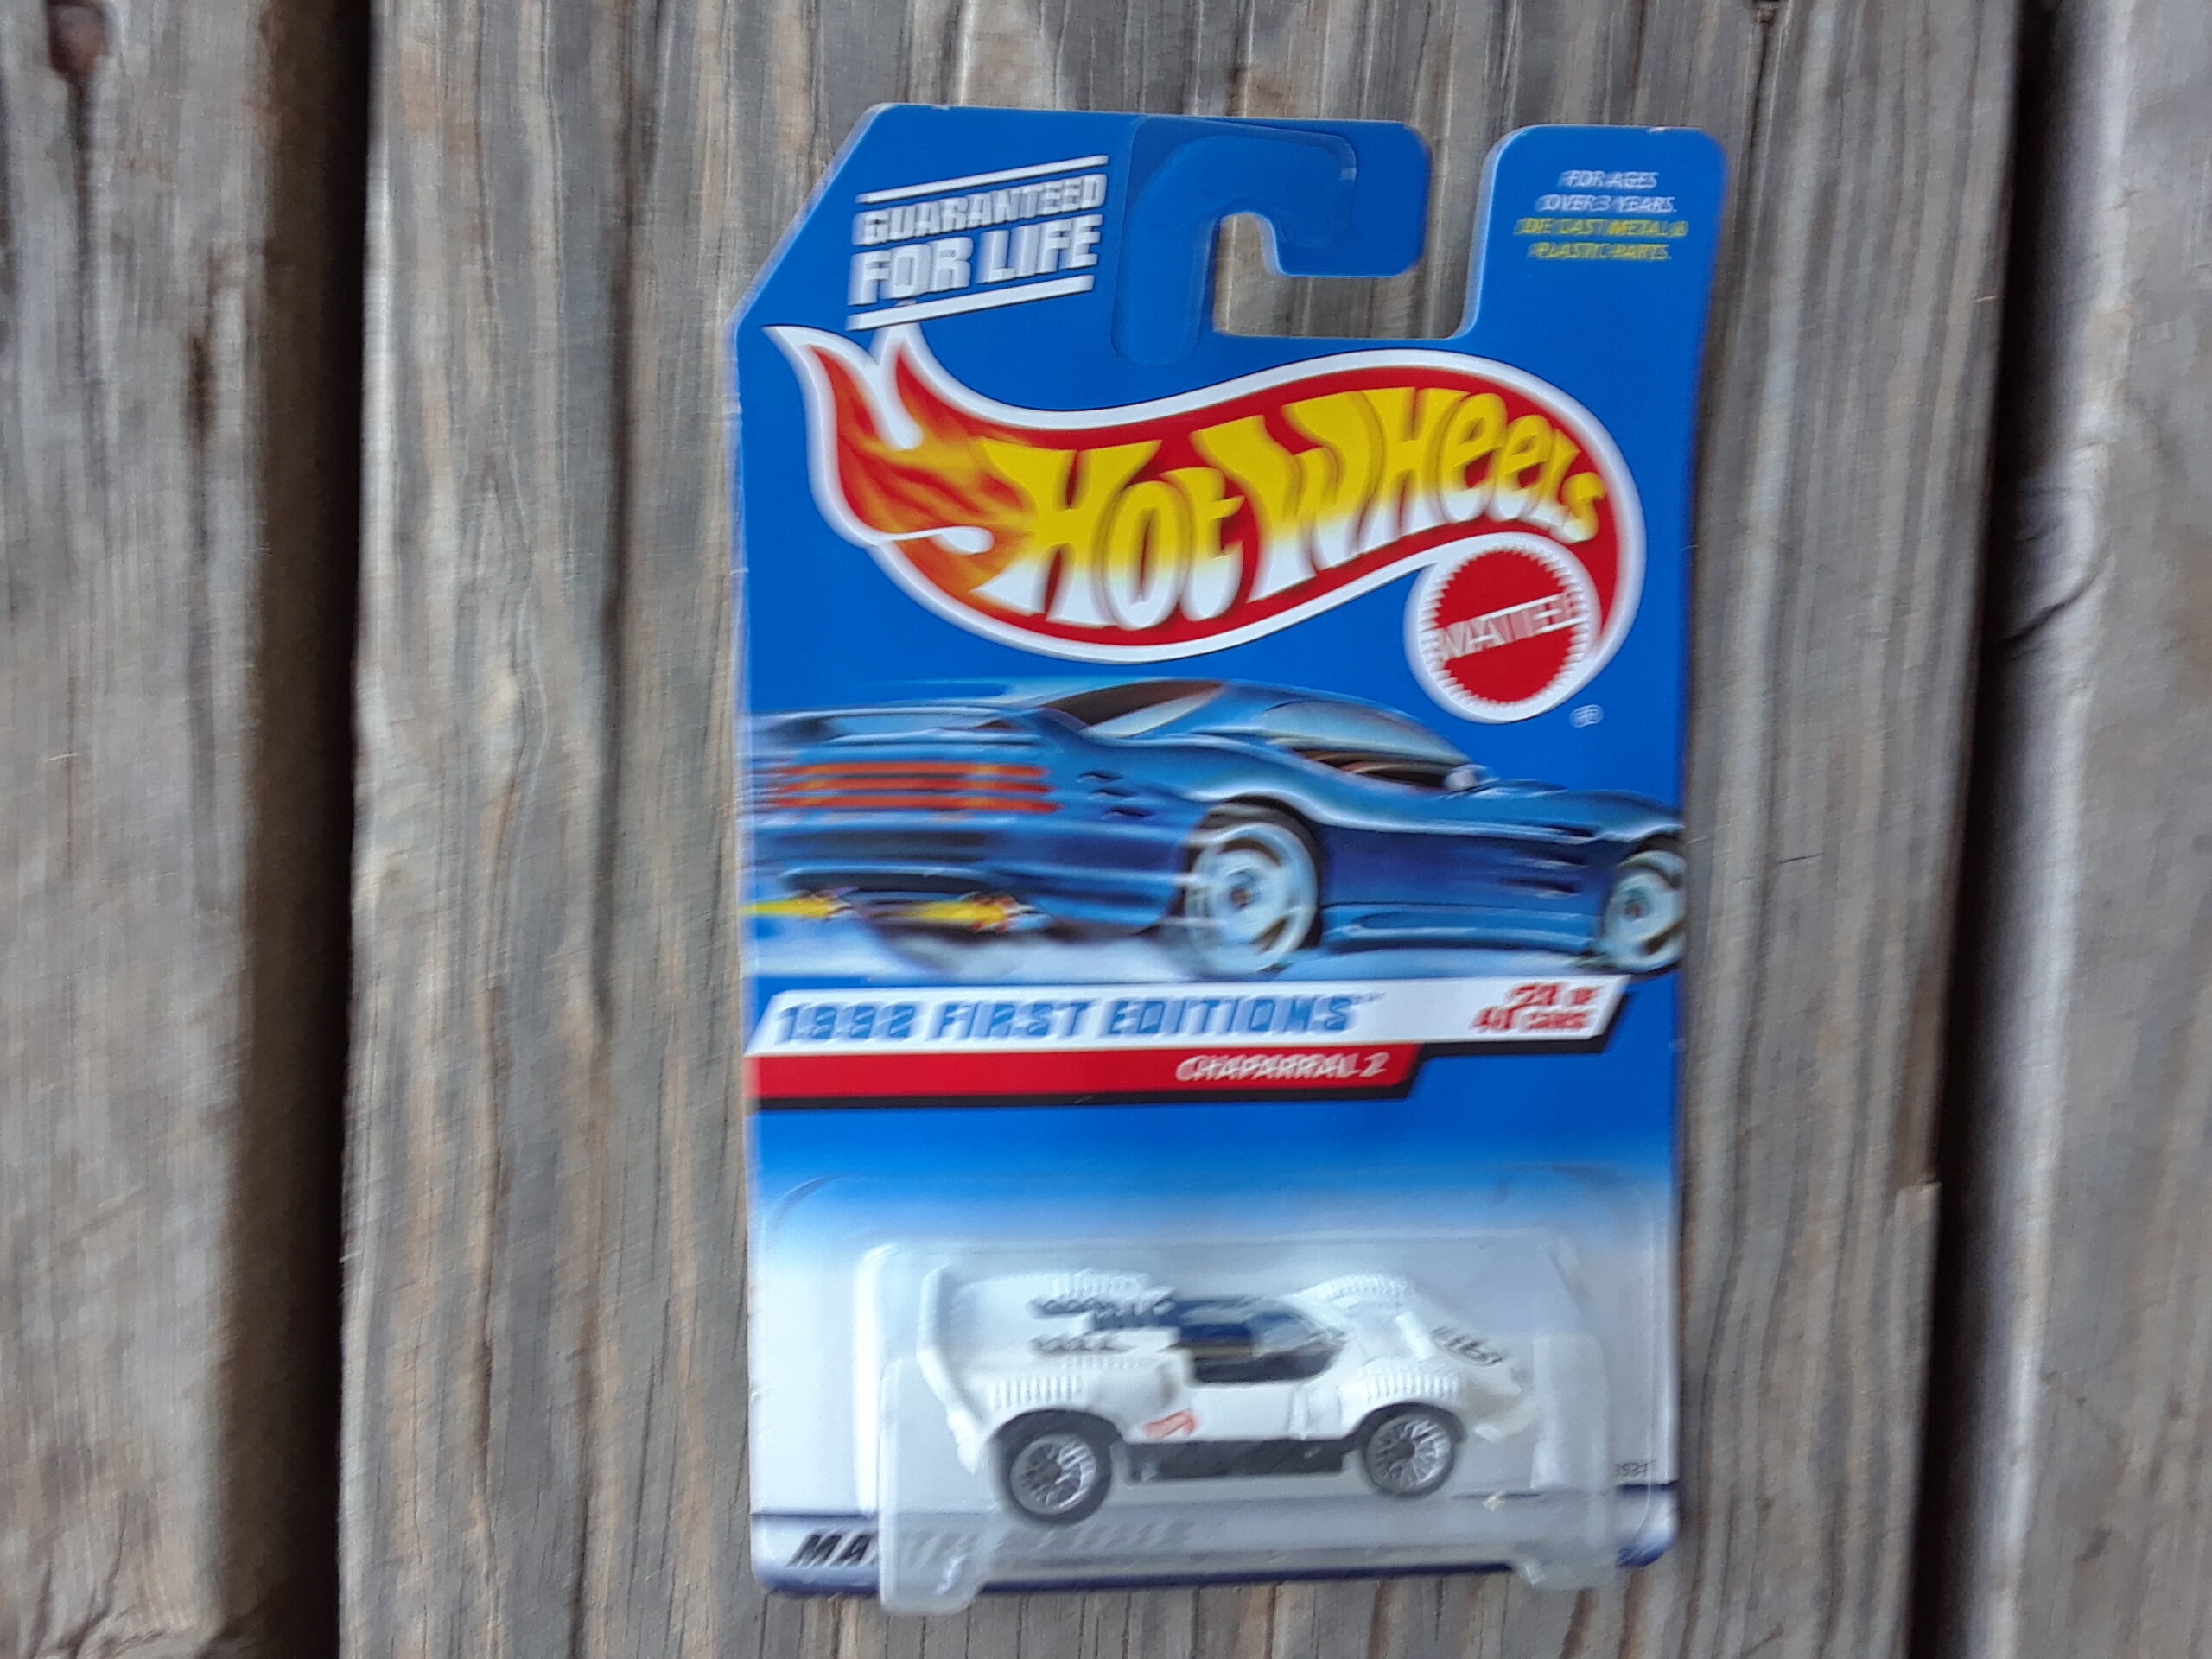 Hot Wheels 1998 First Editions Chaparral 2